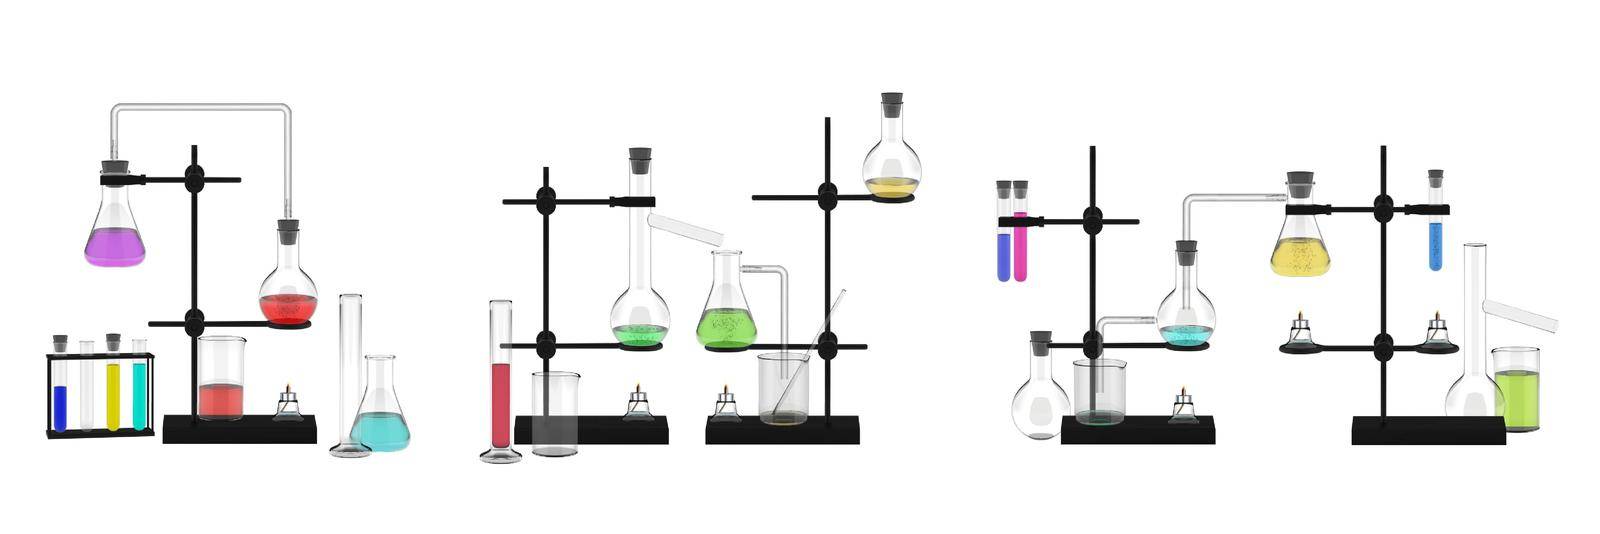 Realistic flasks mockup set. Colletion template of realism style drawn chemical equipment ingredients liquids reagents acids. Medical scientific laboratory experiment and tests analysis illustration.